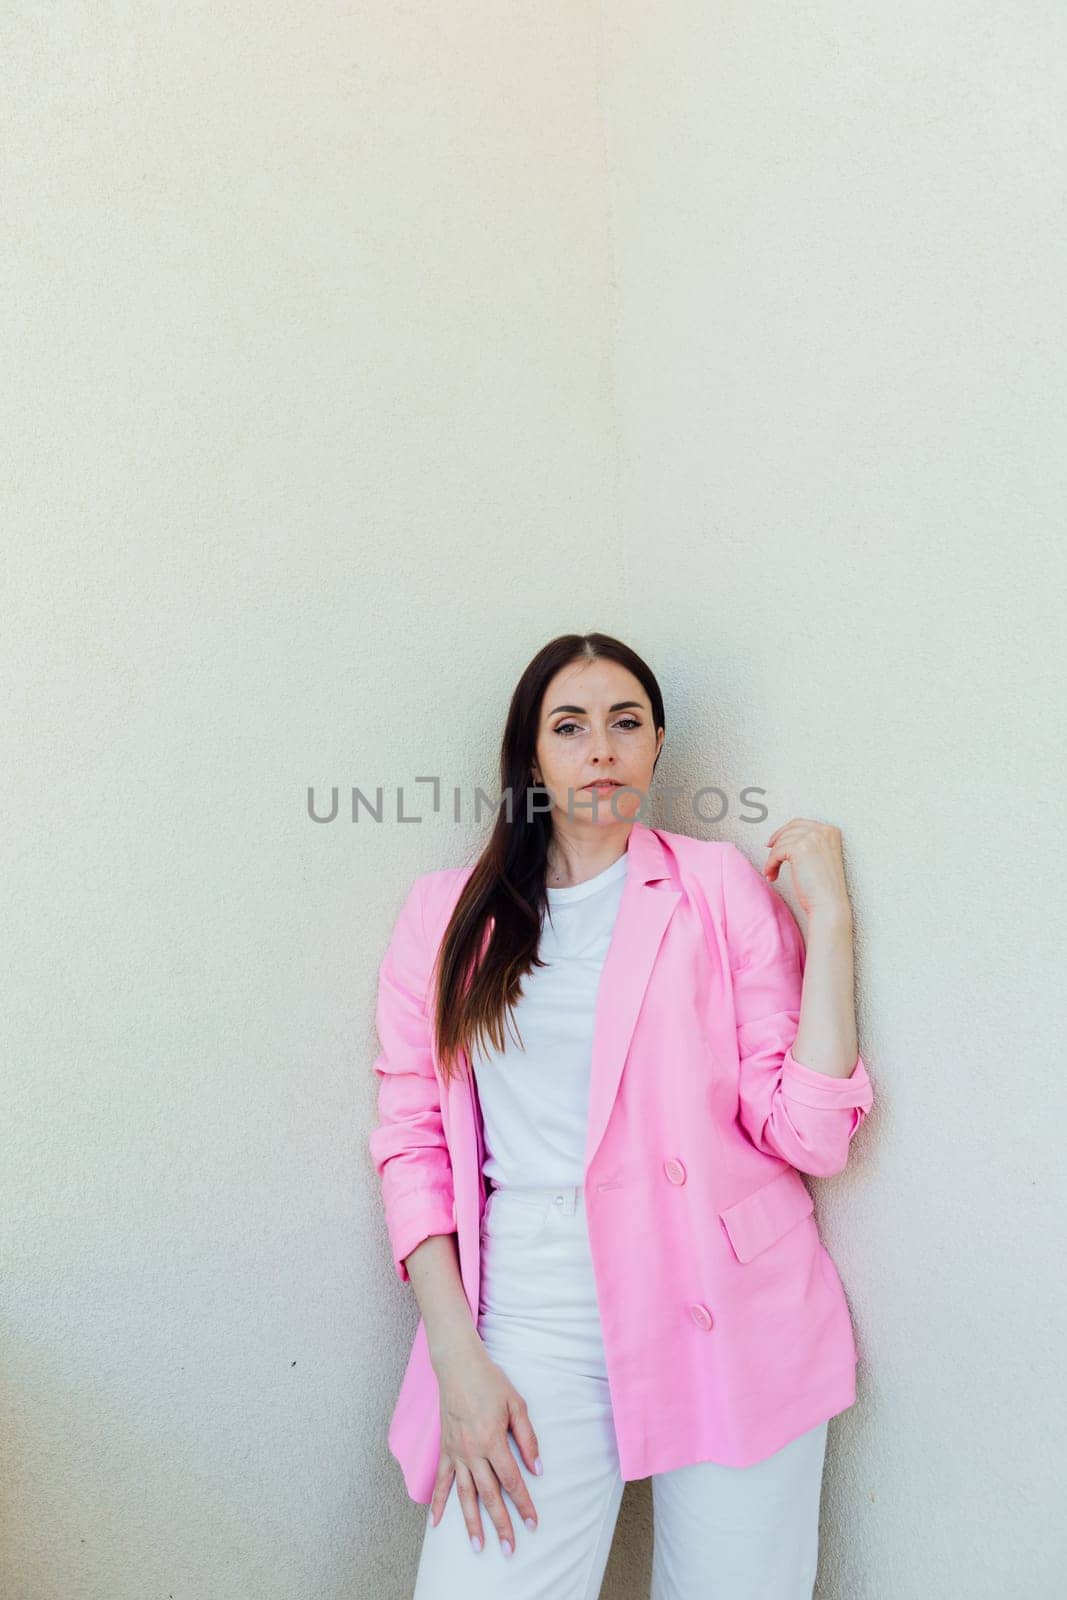 fashionable brunette woman in pink jacket and white pants